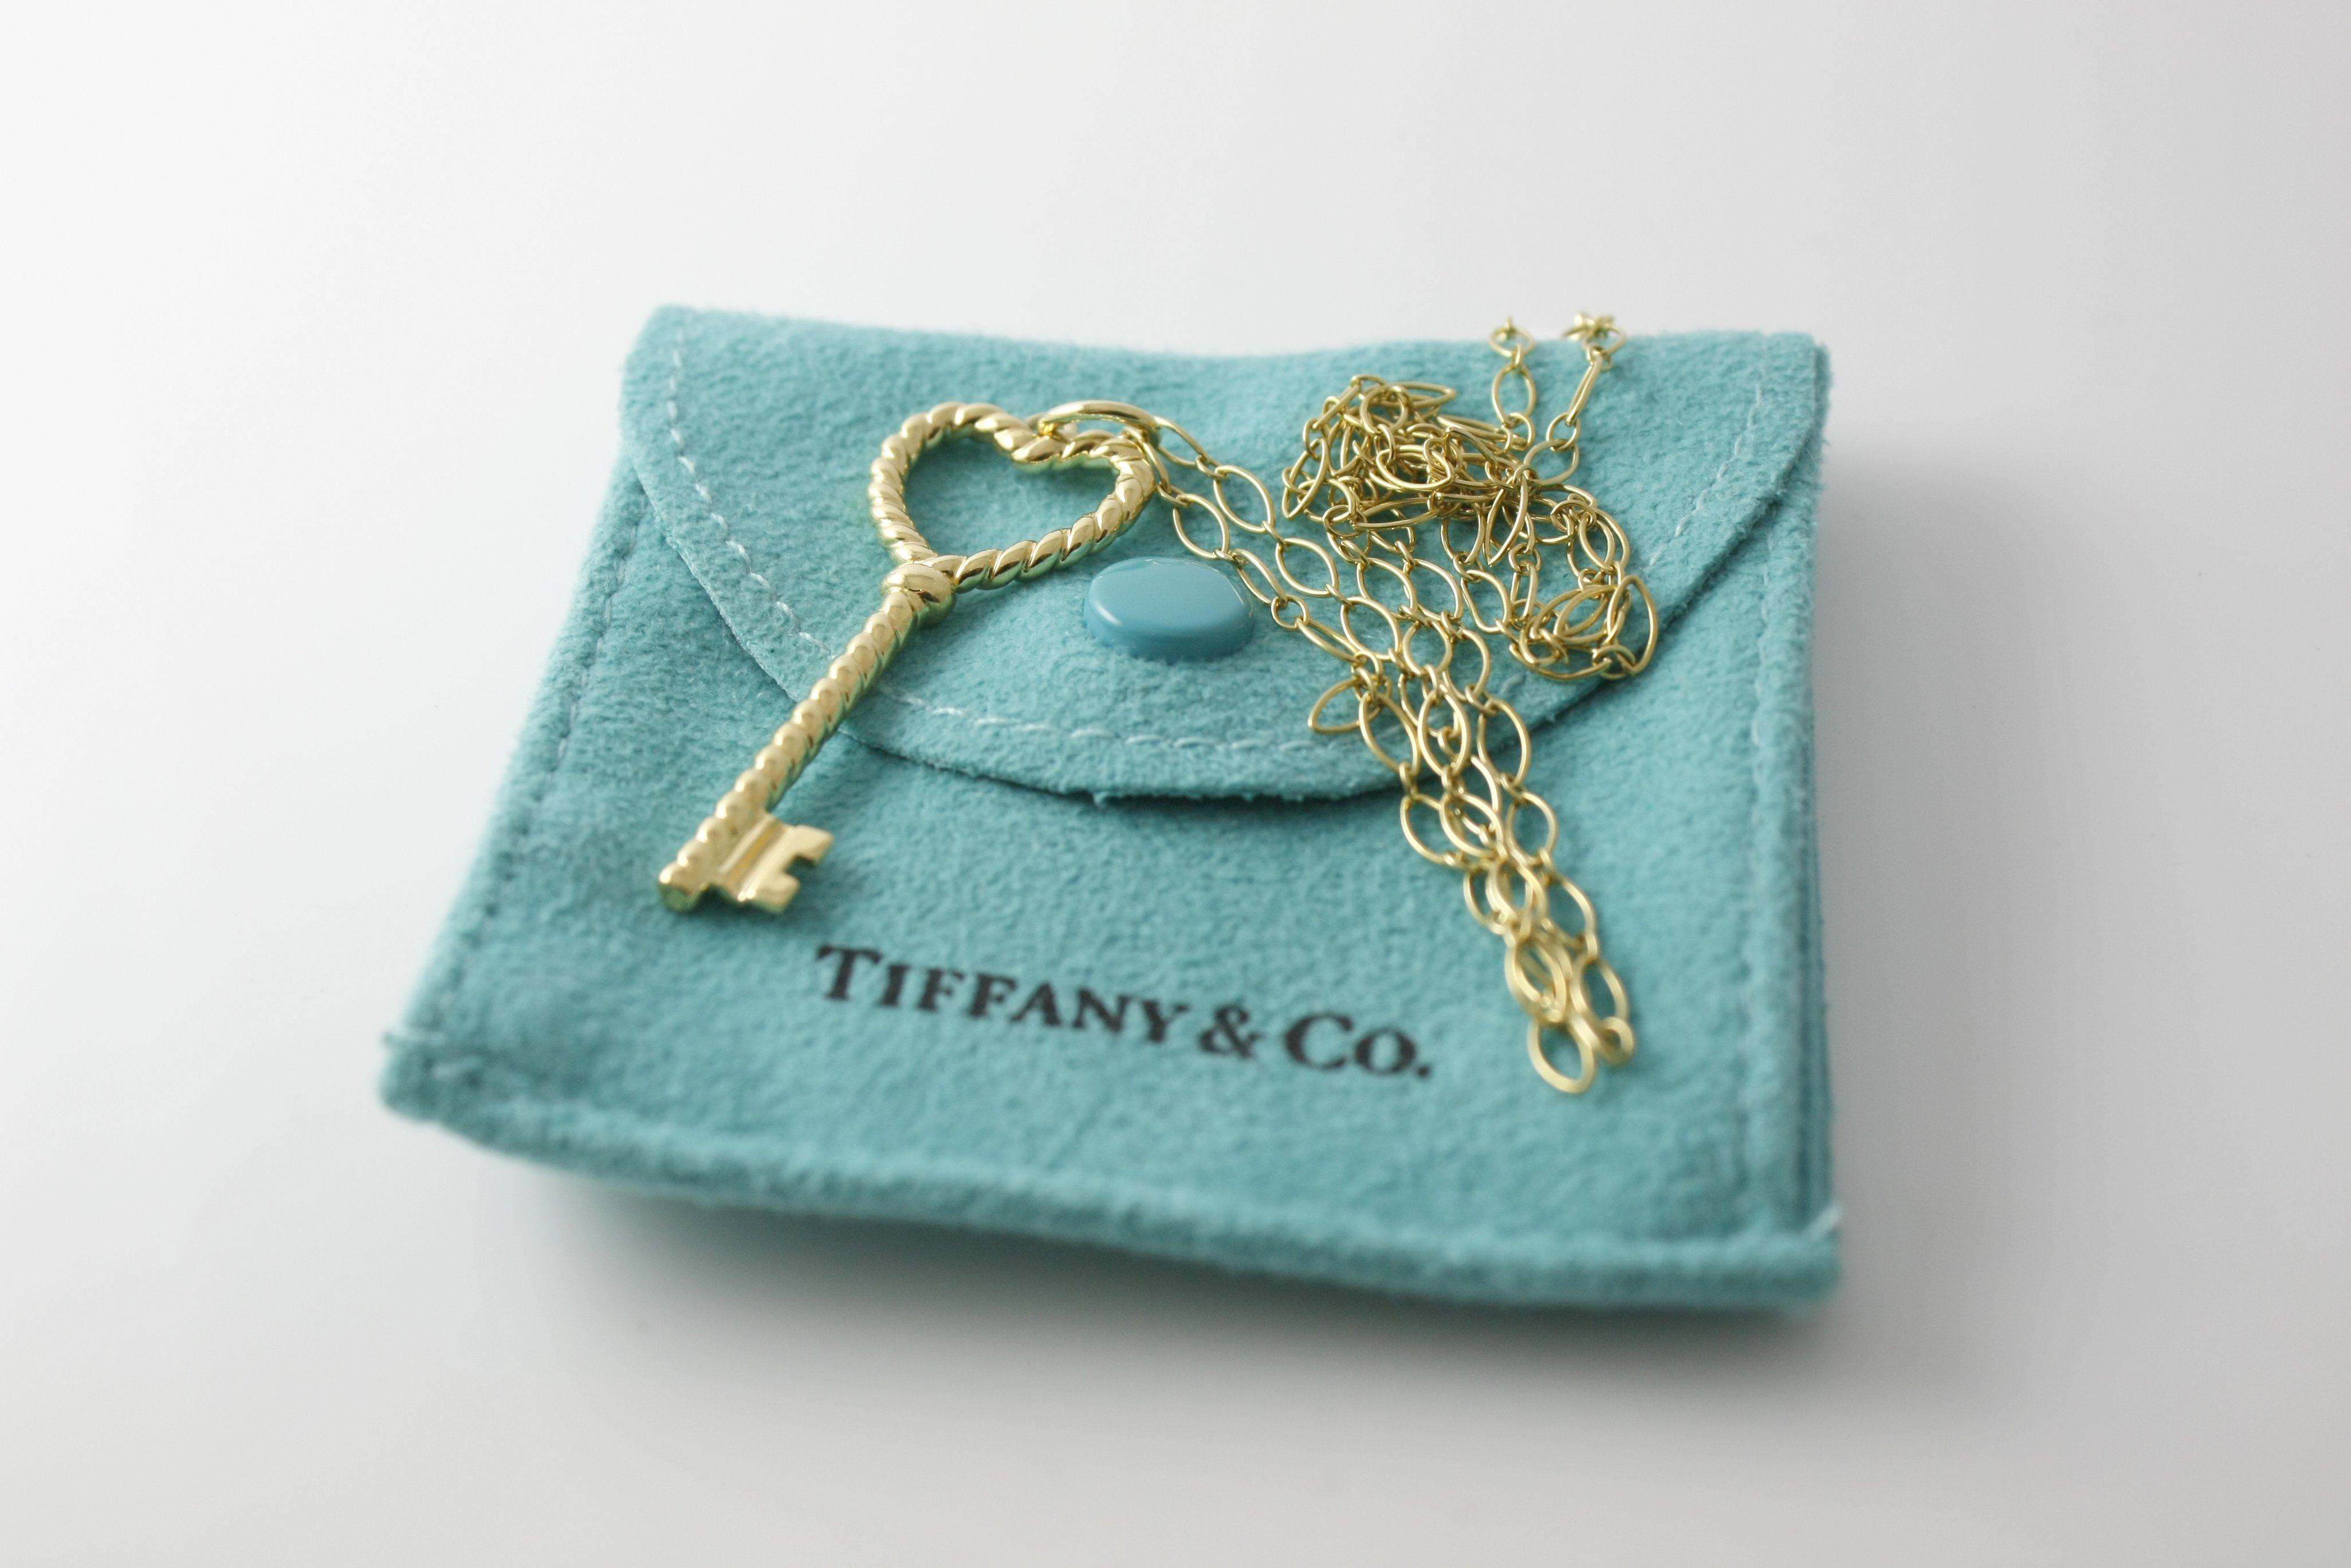 tiffany necklace repair cost